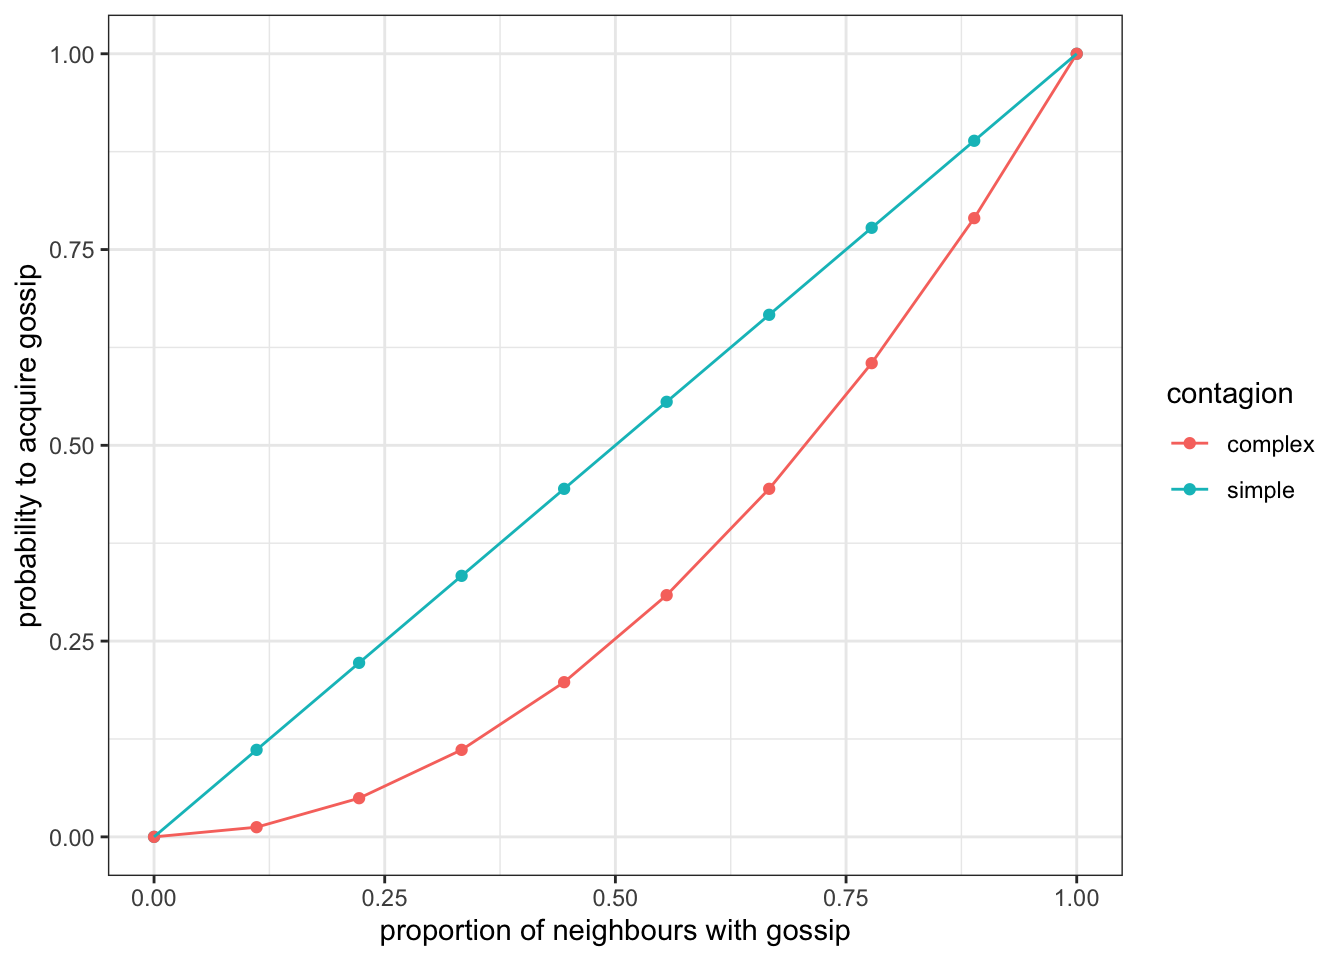 In simple contagion the probability to acquire gossip scales linearly with the proportion of neighbours with gossip, whereas it increases superlinearly (here exponentially) in the case of complex contagion.